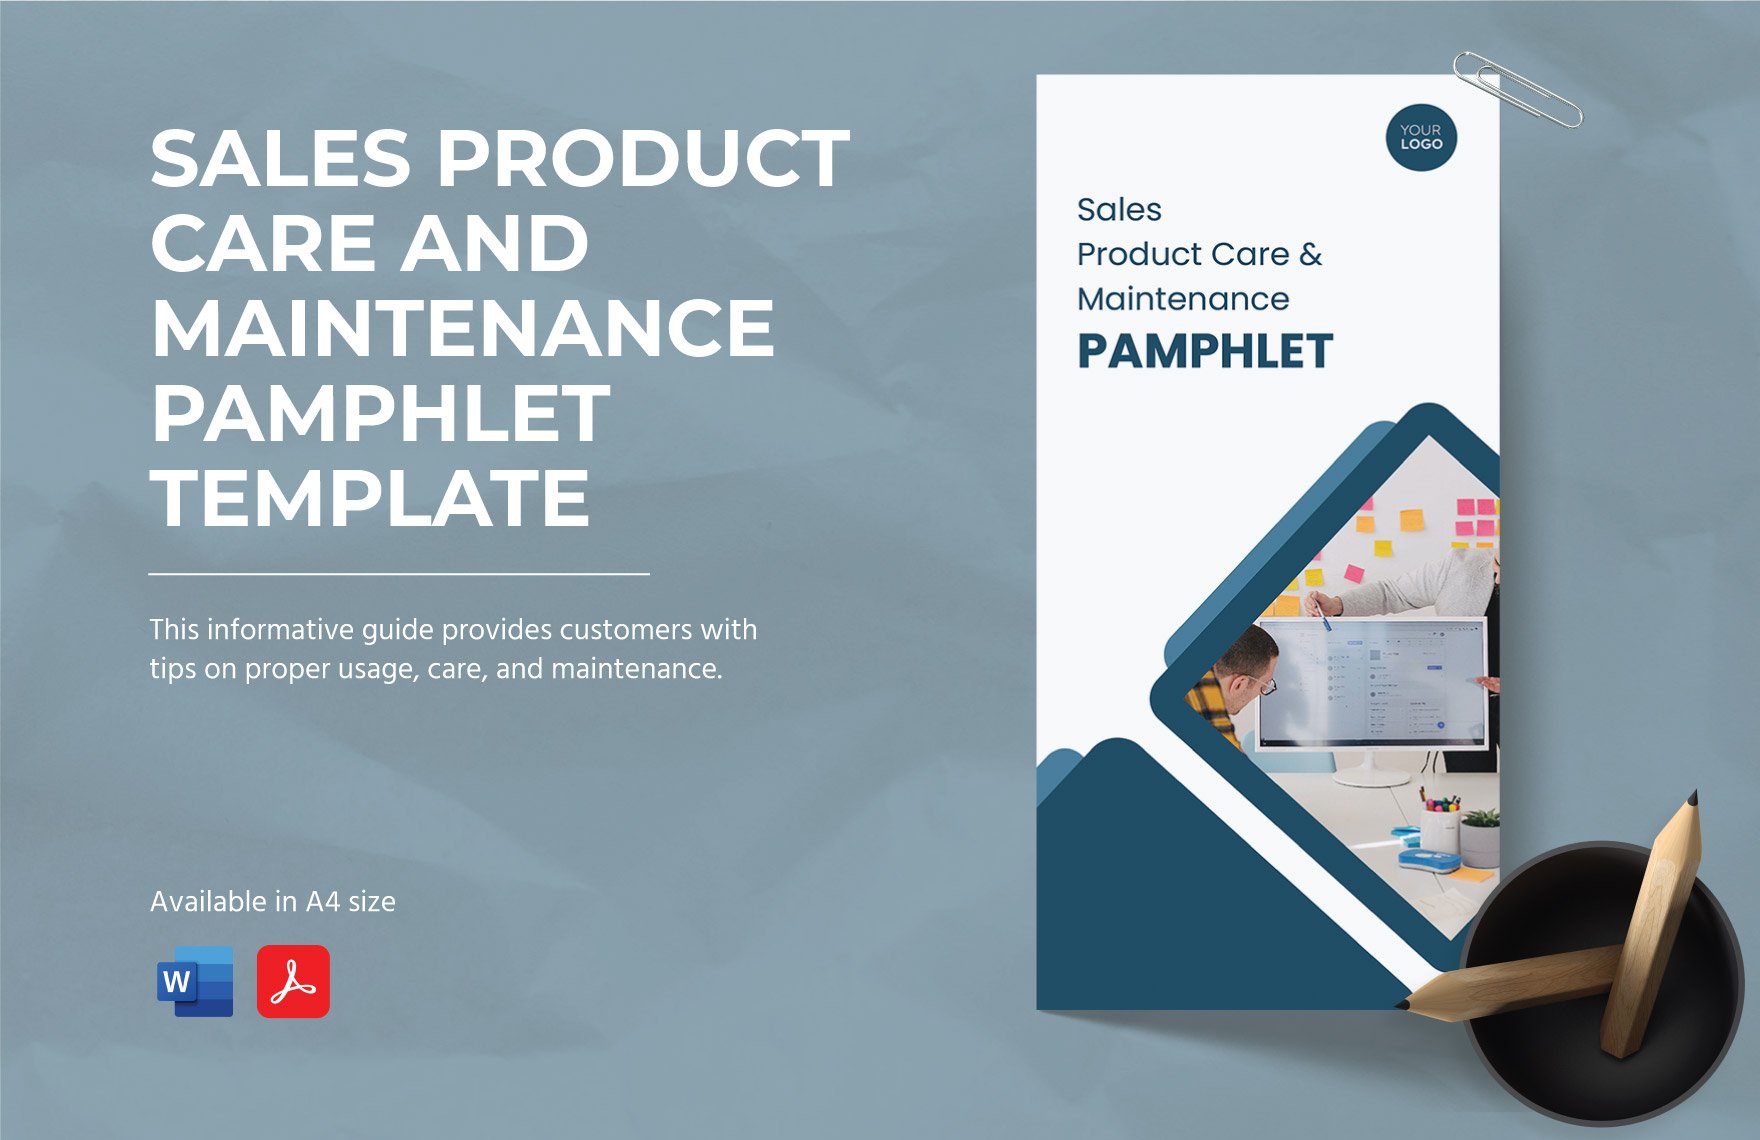 Sales Product Care and Maintenance Pamphlet Template